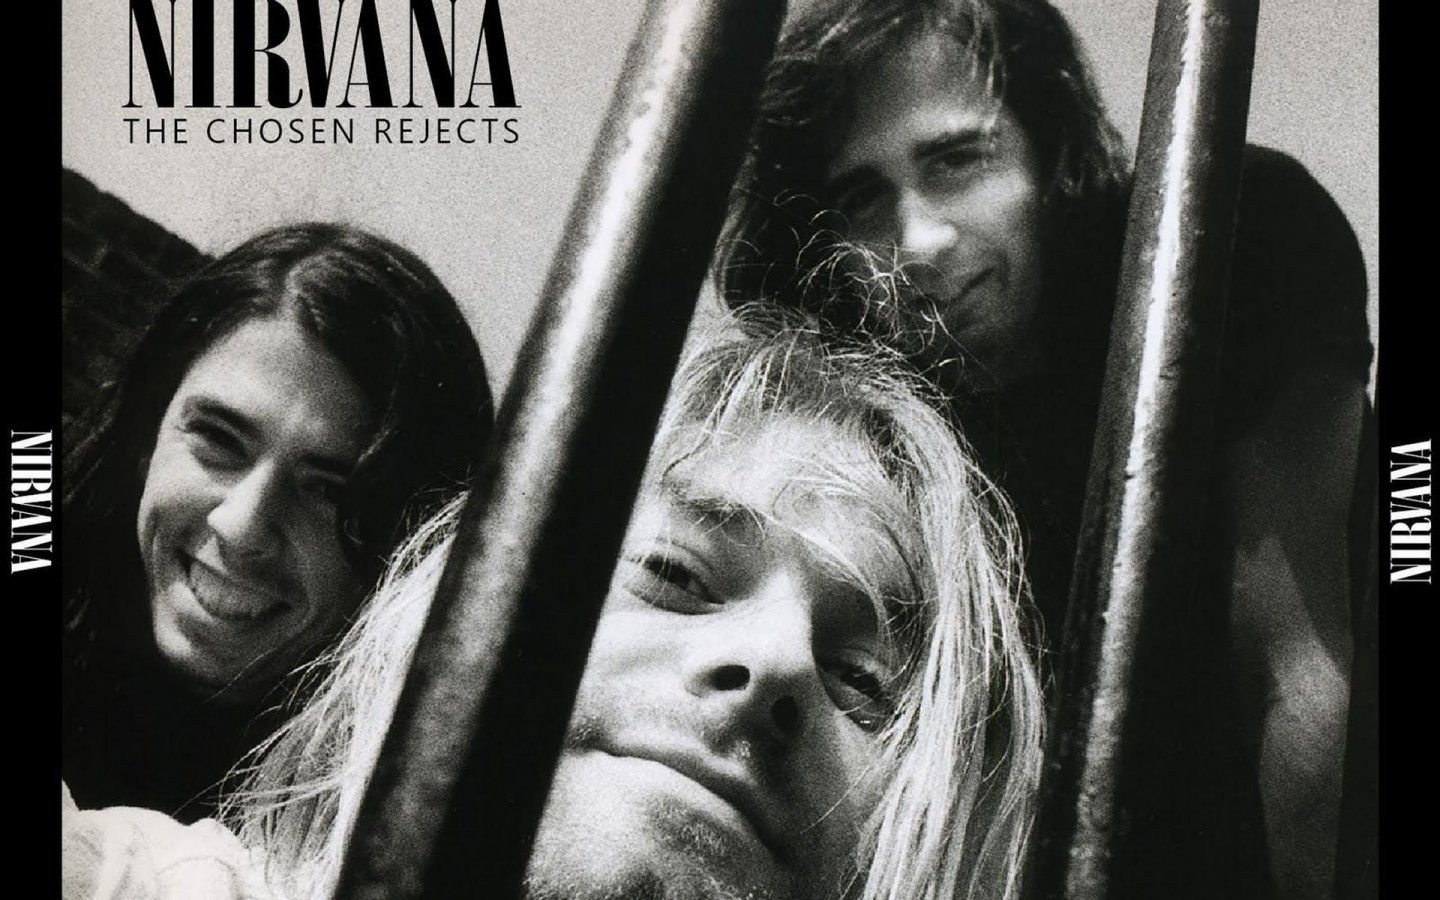 NIRVANA Wallpaper 1440x900 Wallpapers 1440x900 Wallpapers Pictures